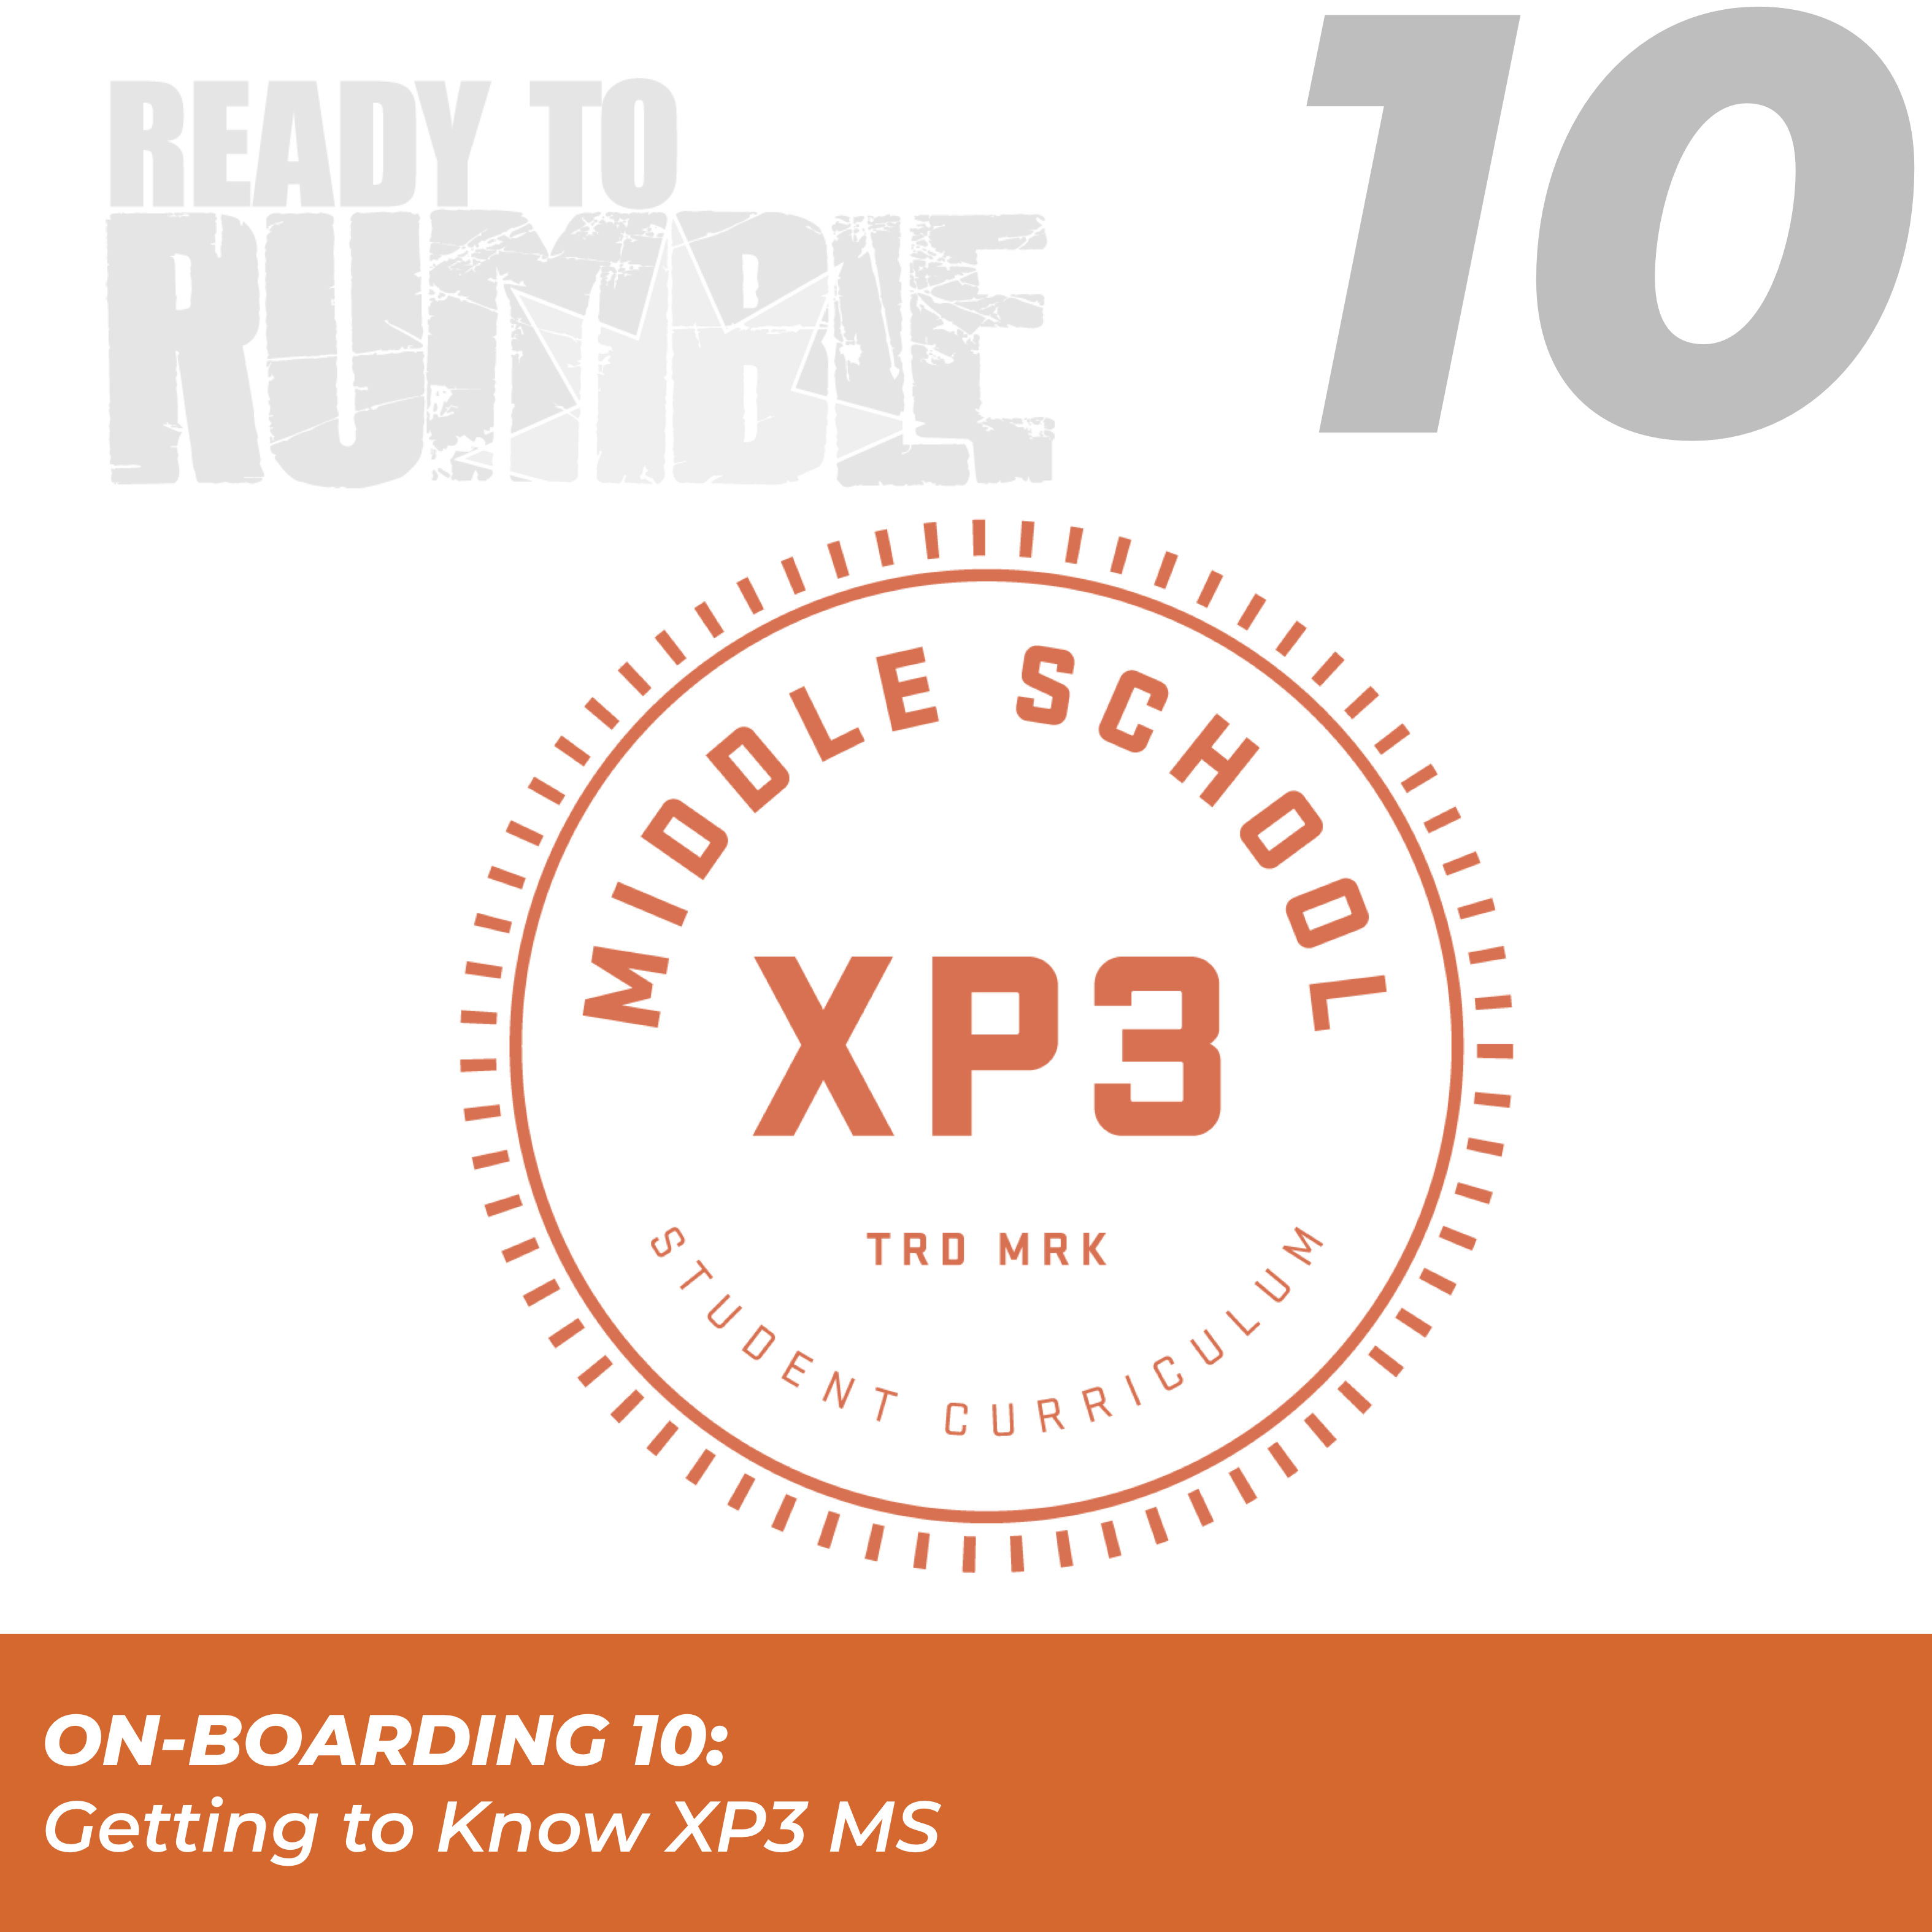 Click here for On-boarding 10: Getting to know XP3 Middle School.